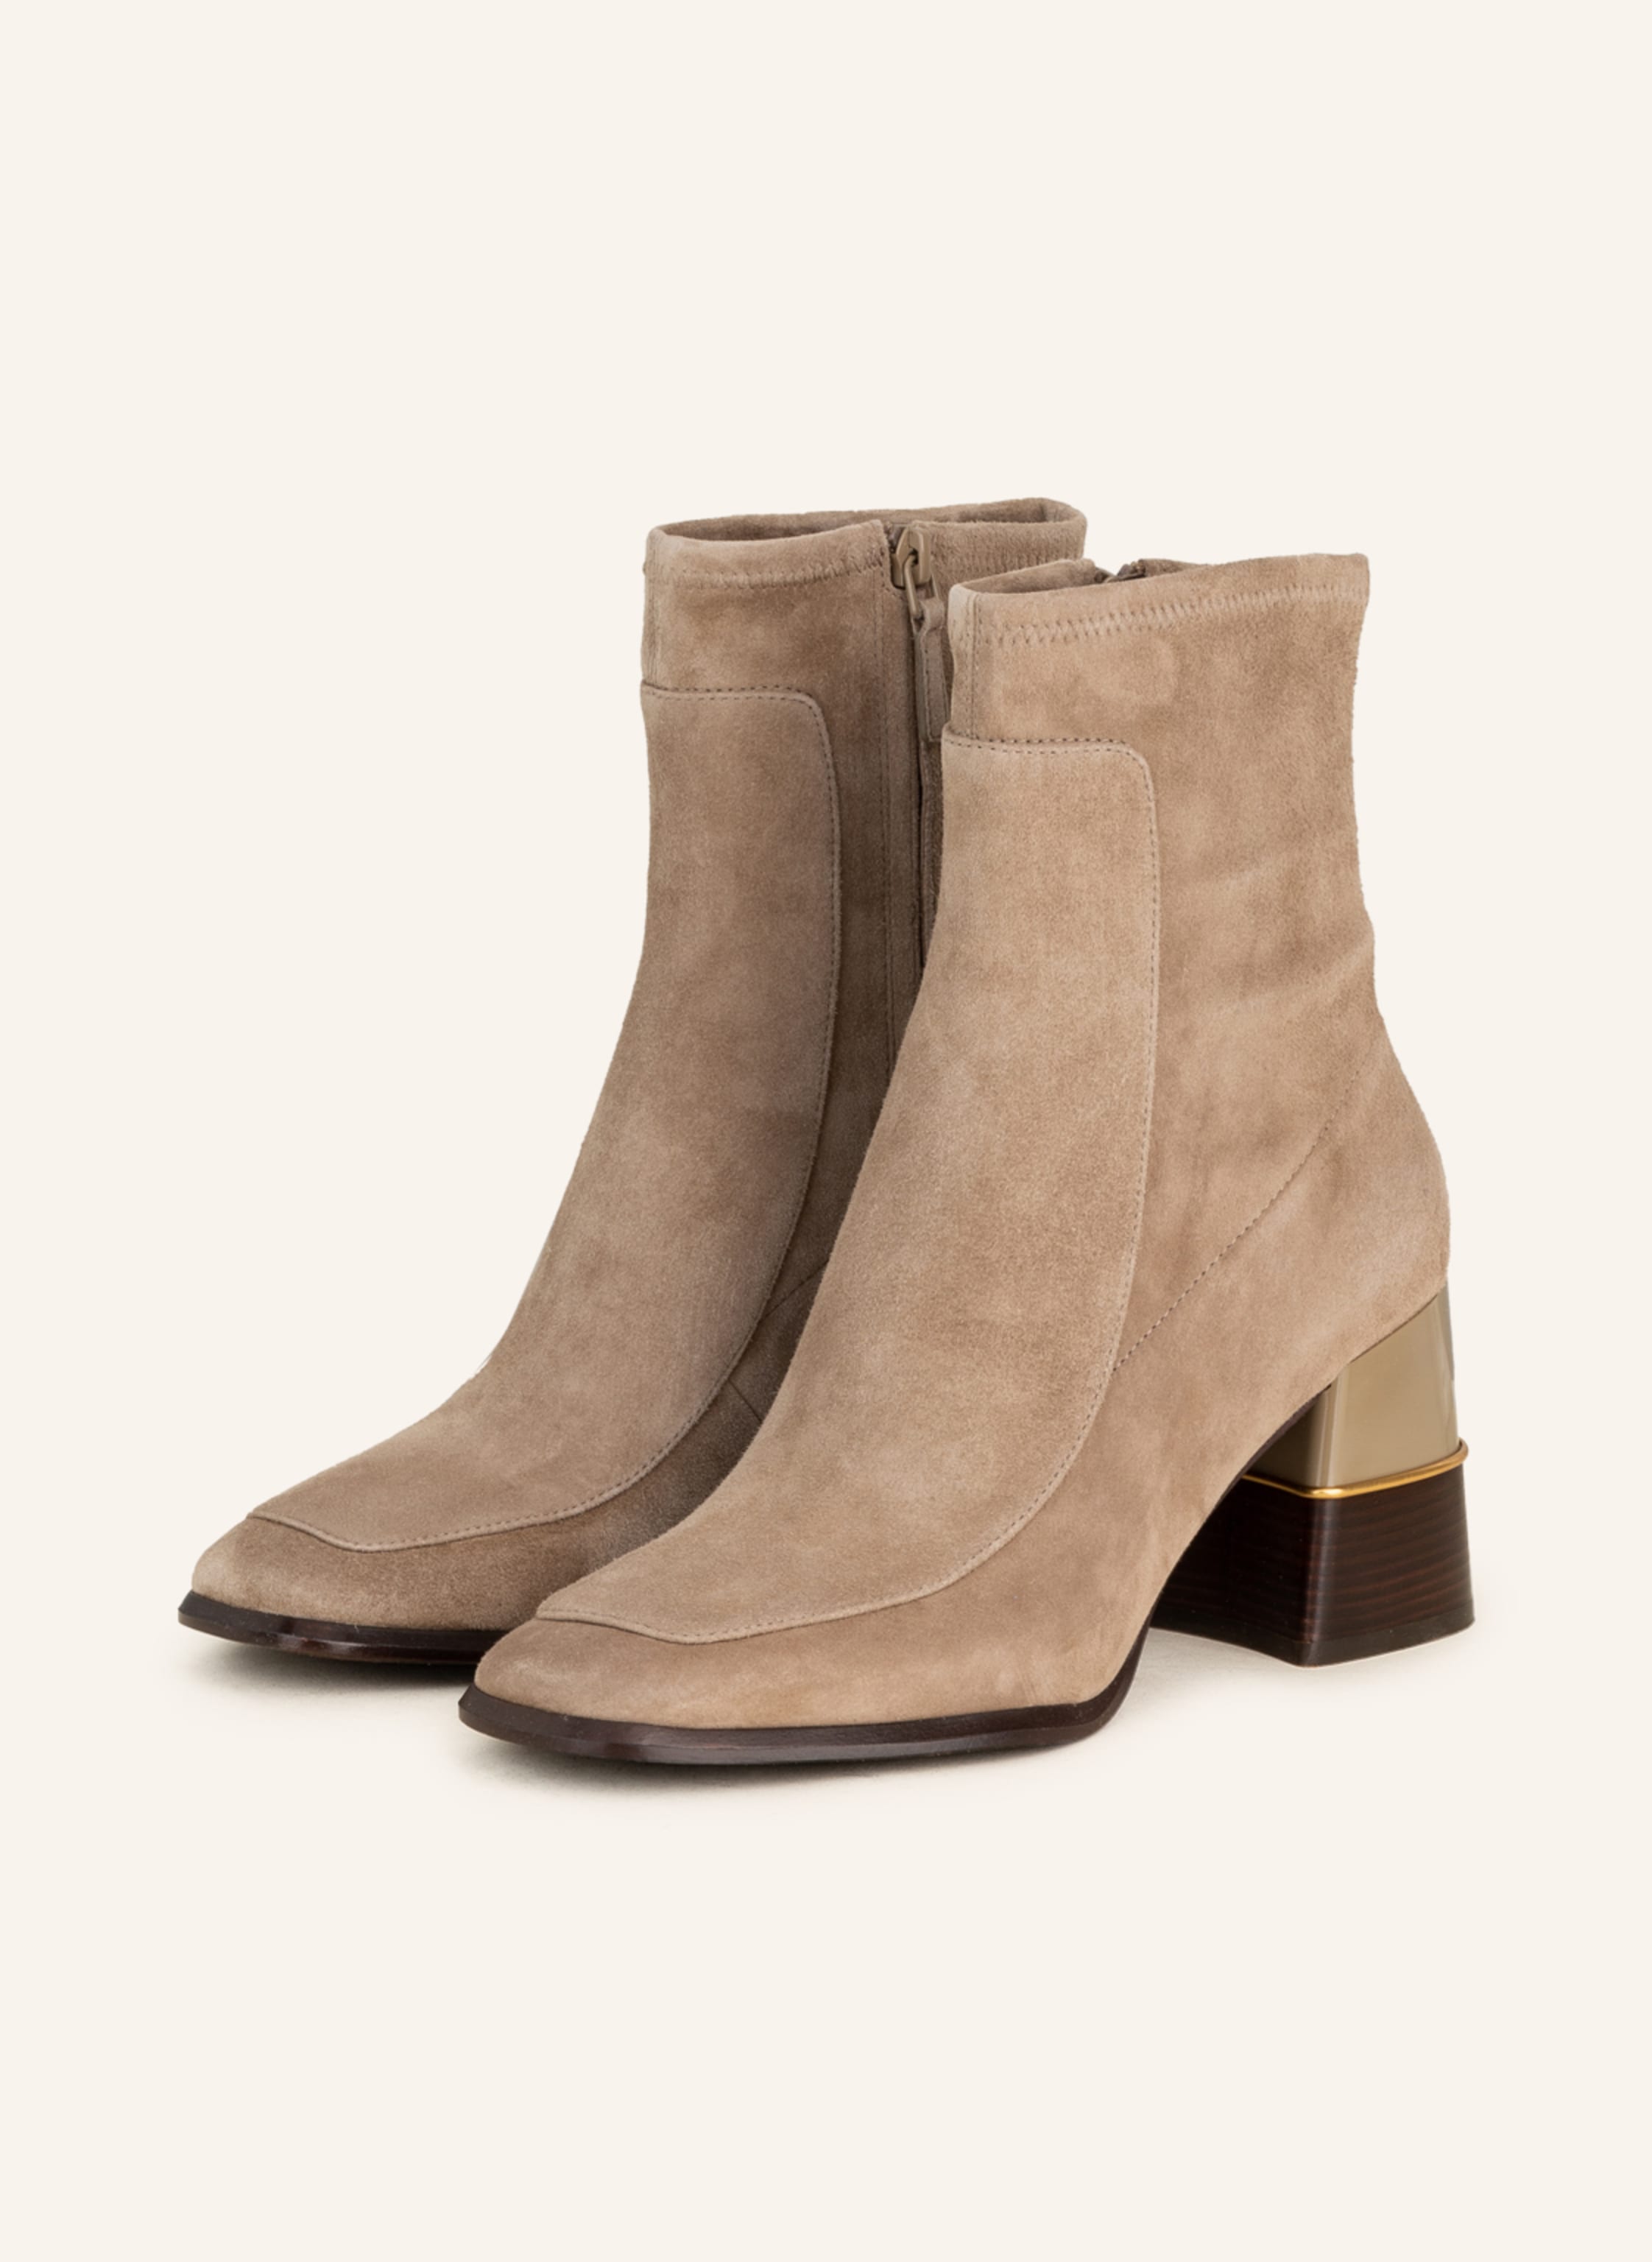 TORY BURCH Ankle boots in cream | Breuninger